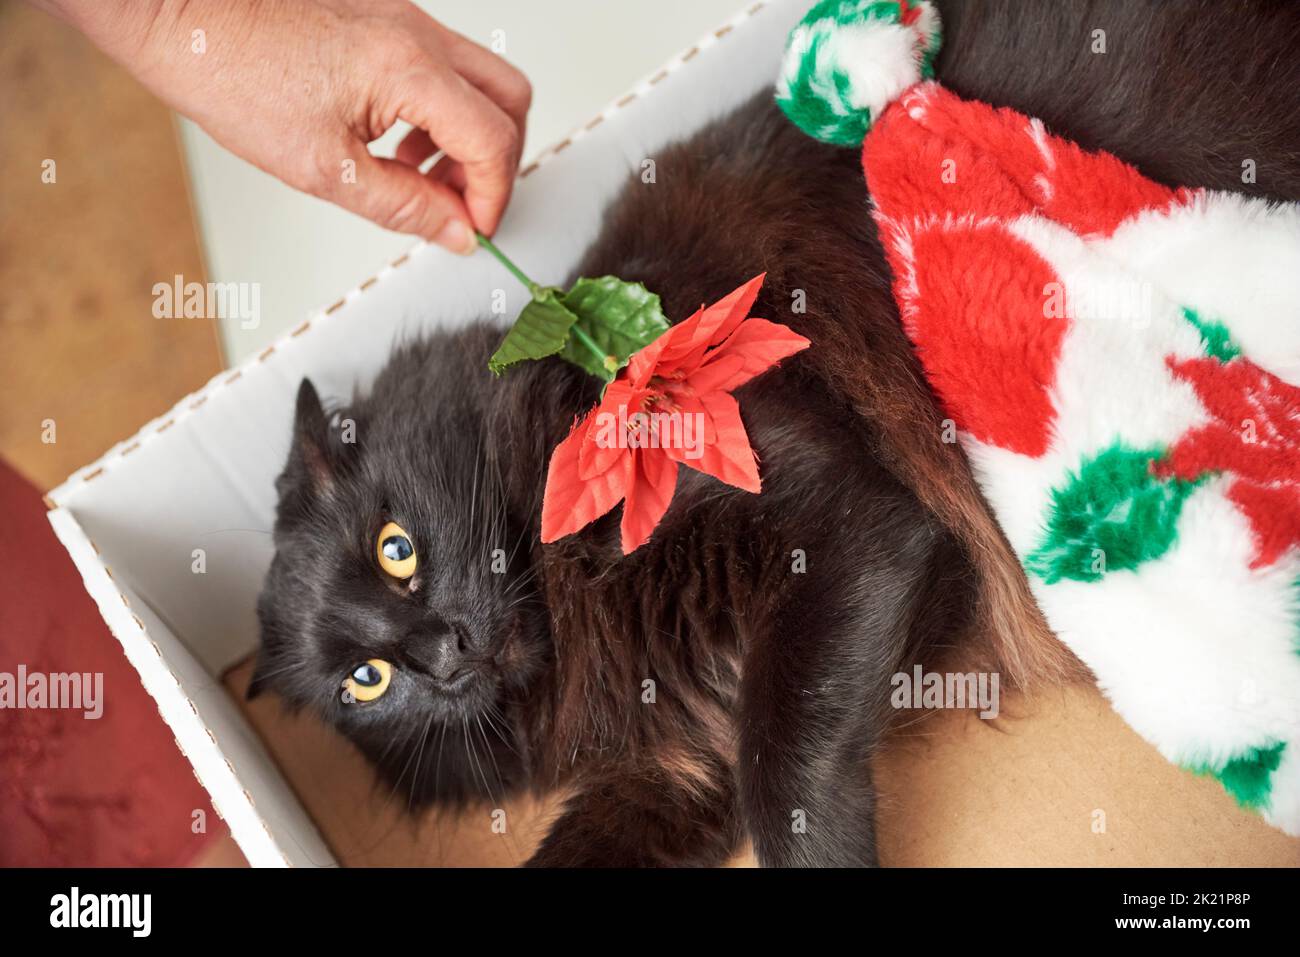 Angry black cat looking at camera being teased with a red Christmas flower, at home. Stock Photo